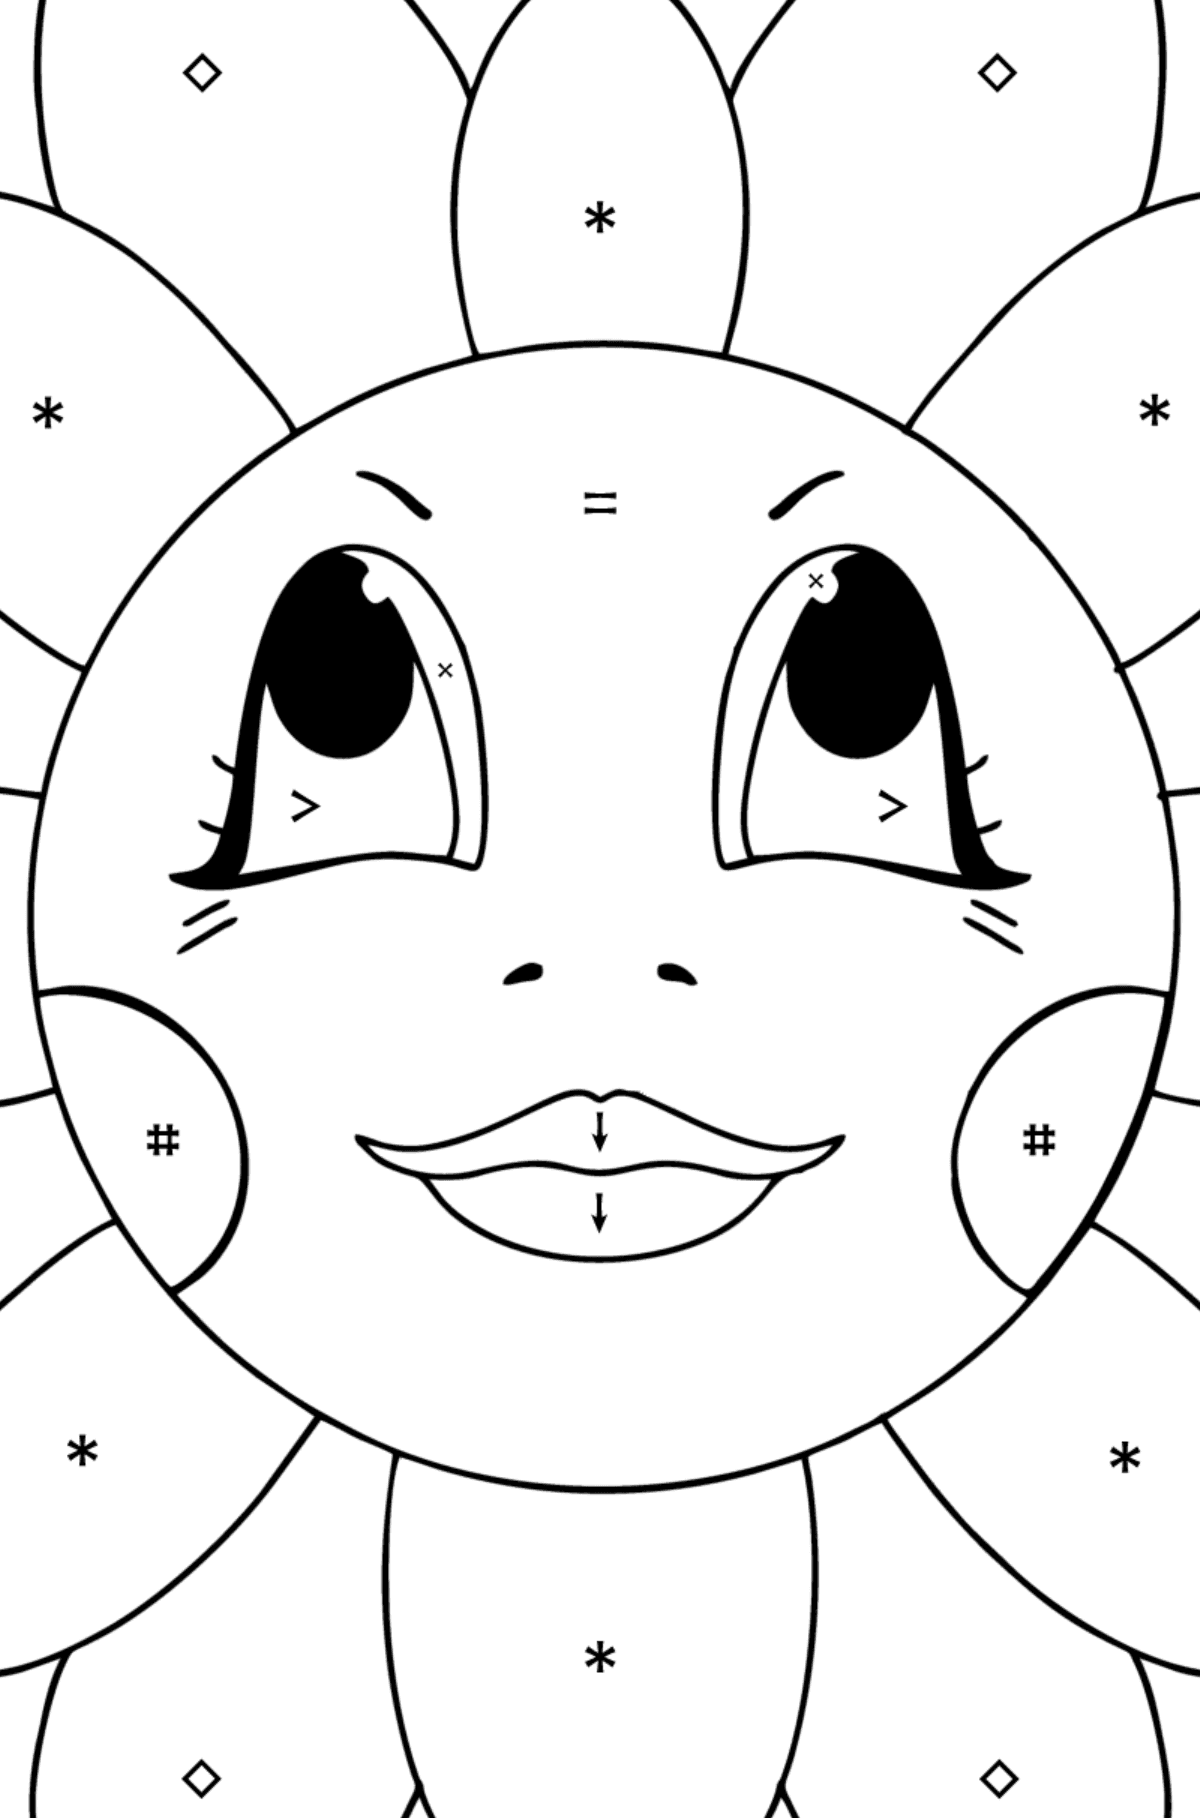 Chamomile with eyes coloring page - Coloring by Symbols for Kids